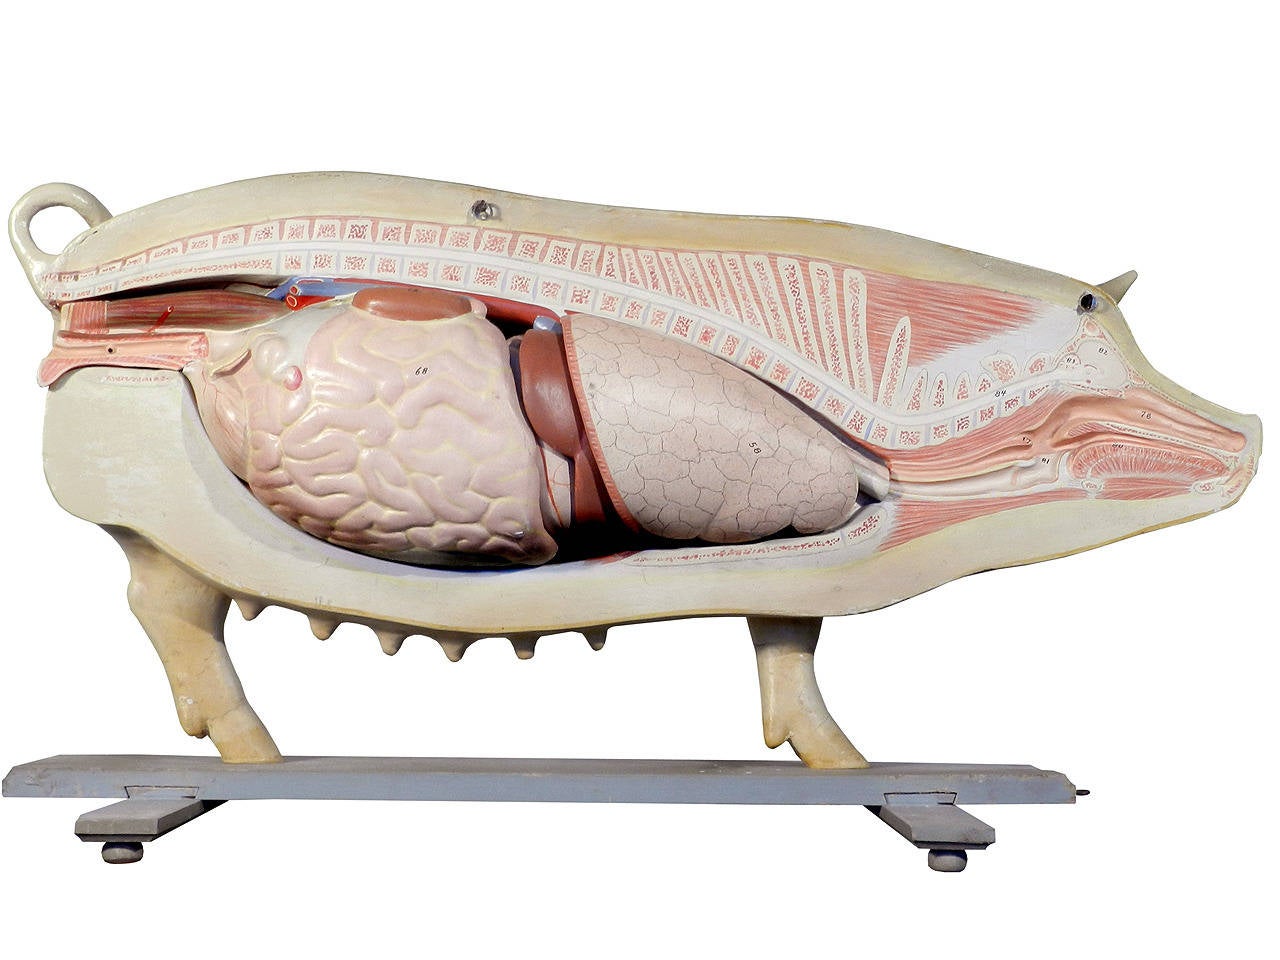 20th Century Life Size Anatomical Model of Pig, Germany